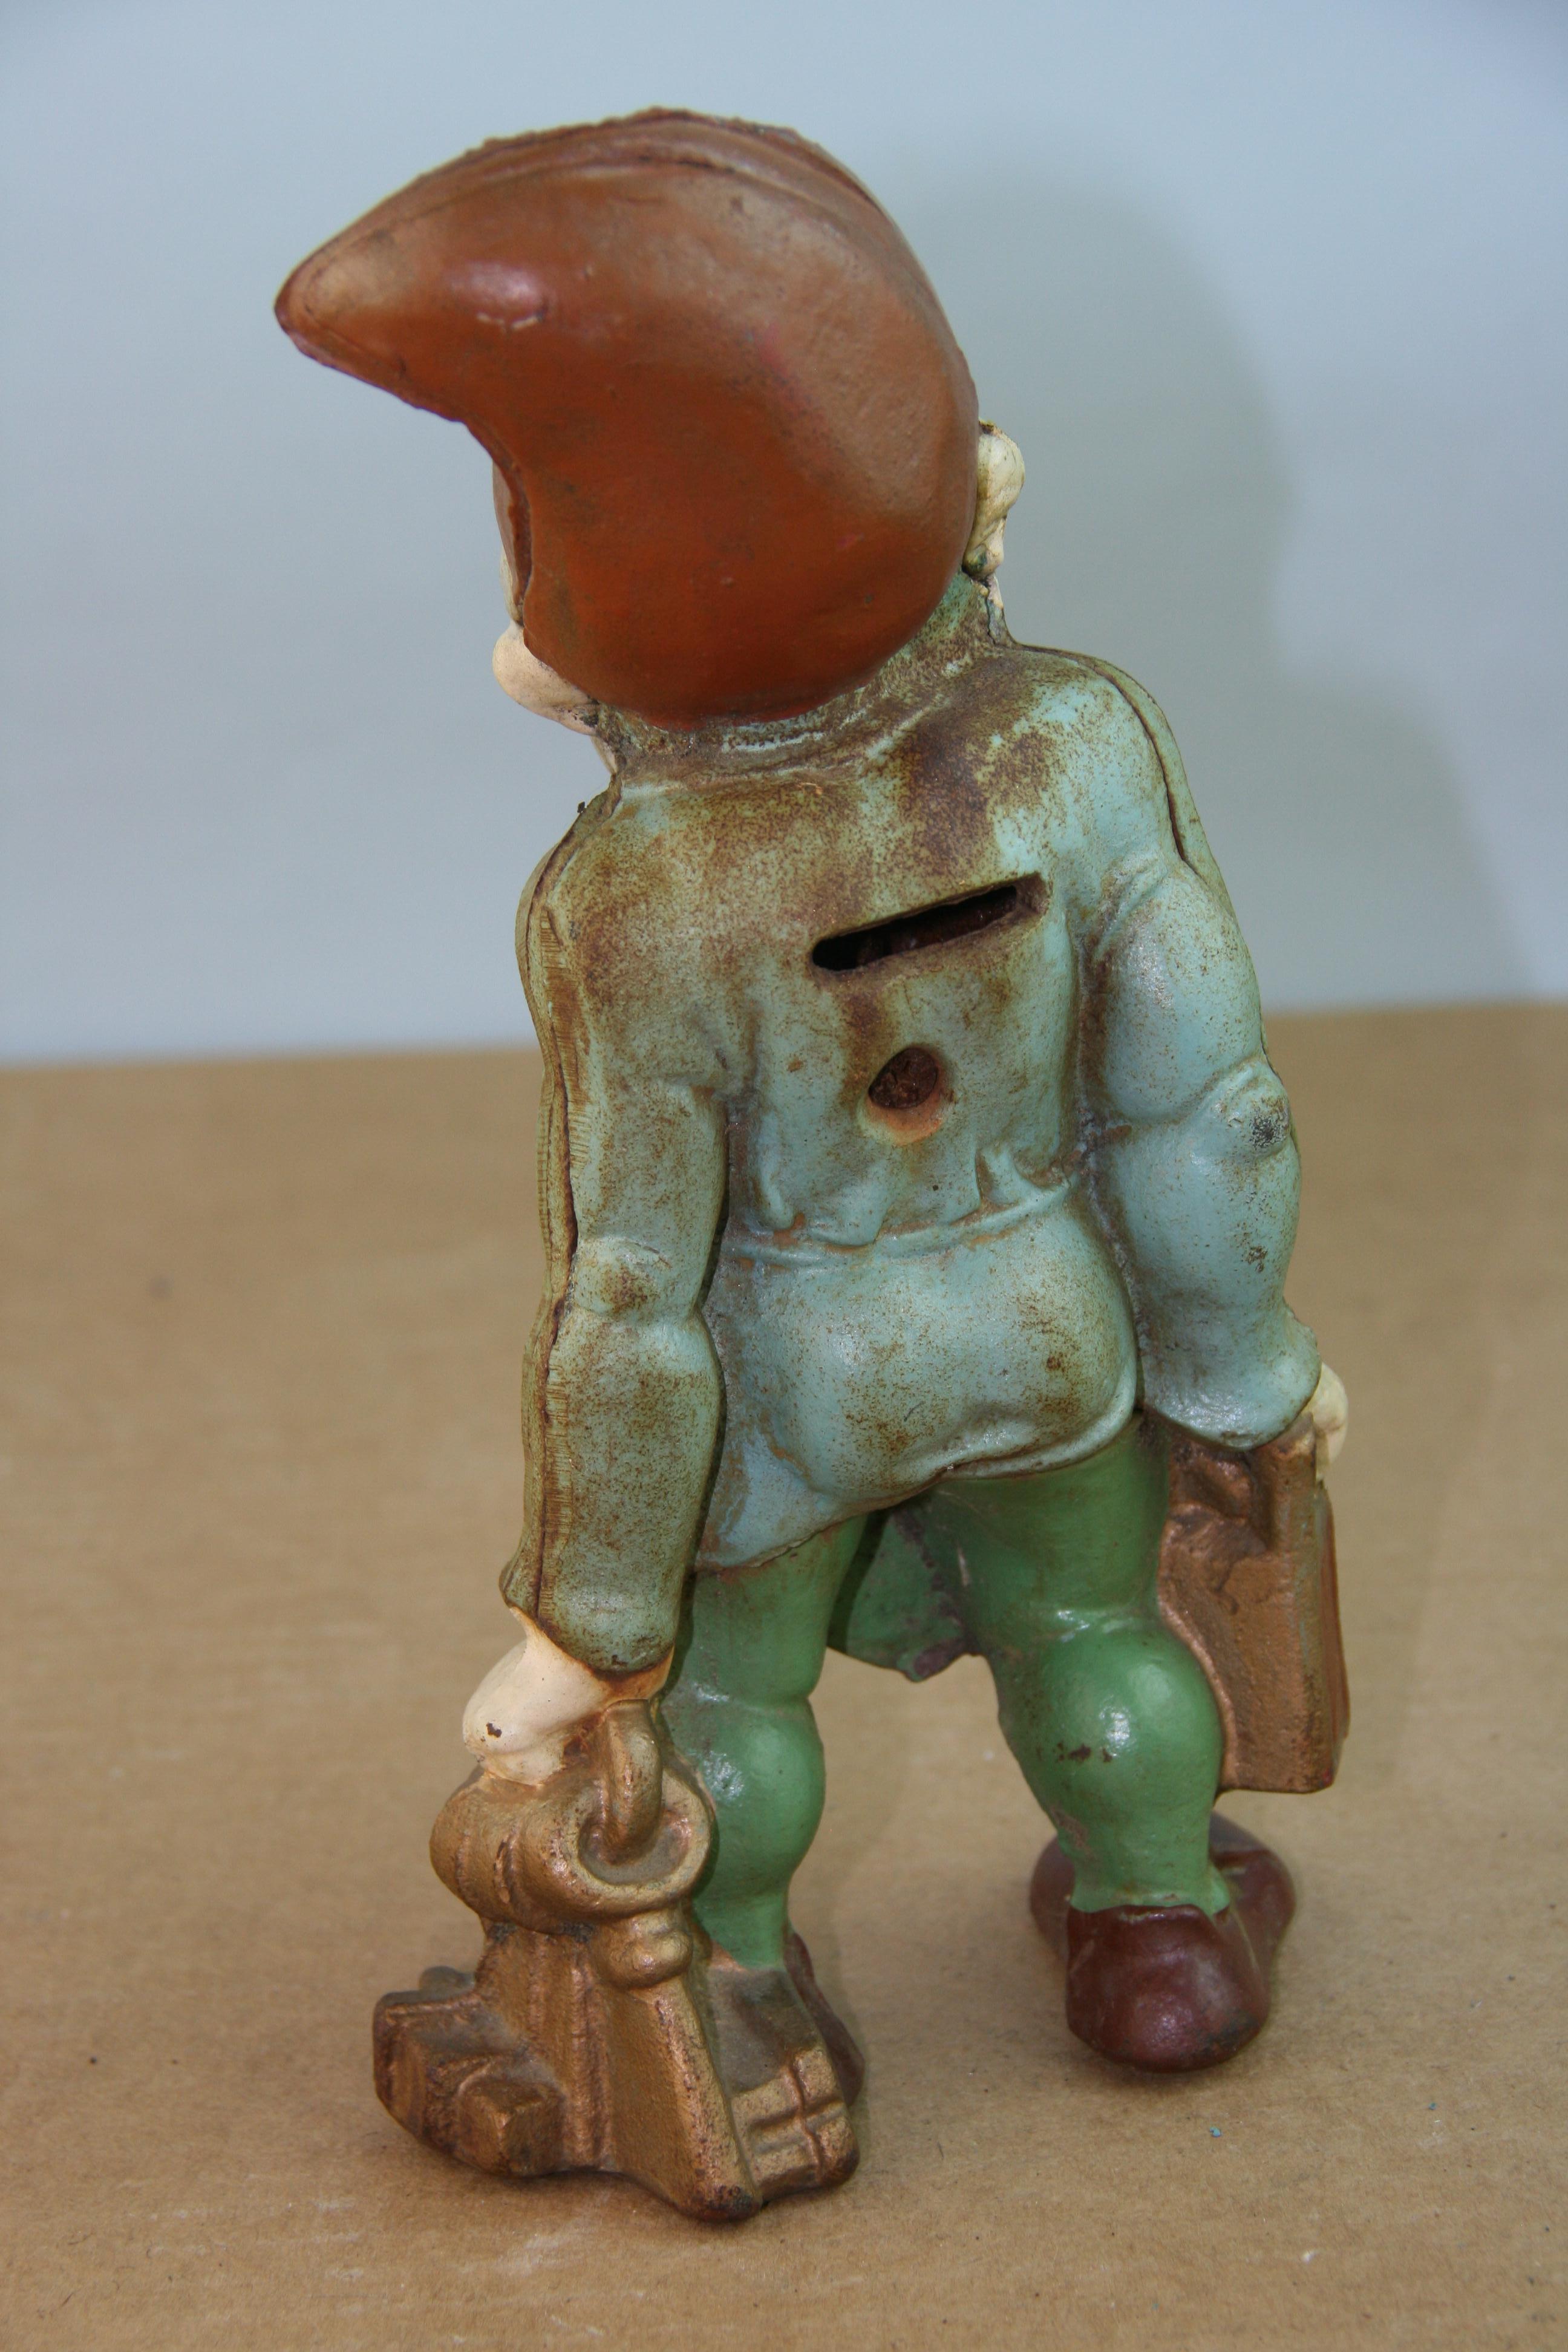 Hand-Crafted  Folk Art Rare Antique  Gnome Sculpture  For Sale